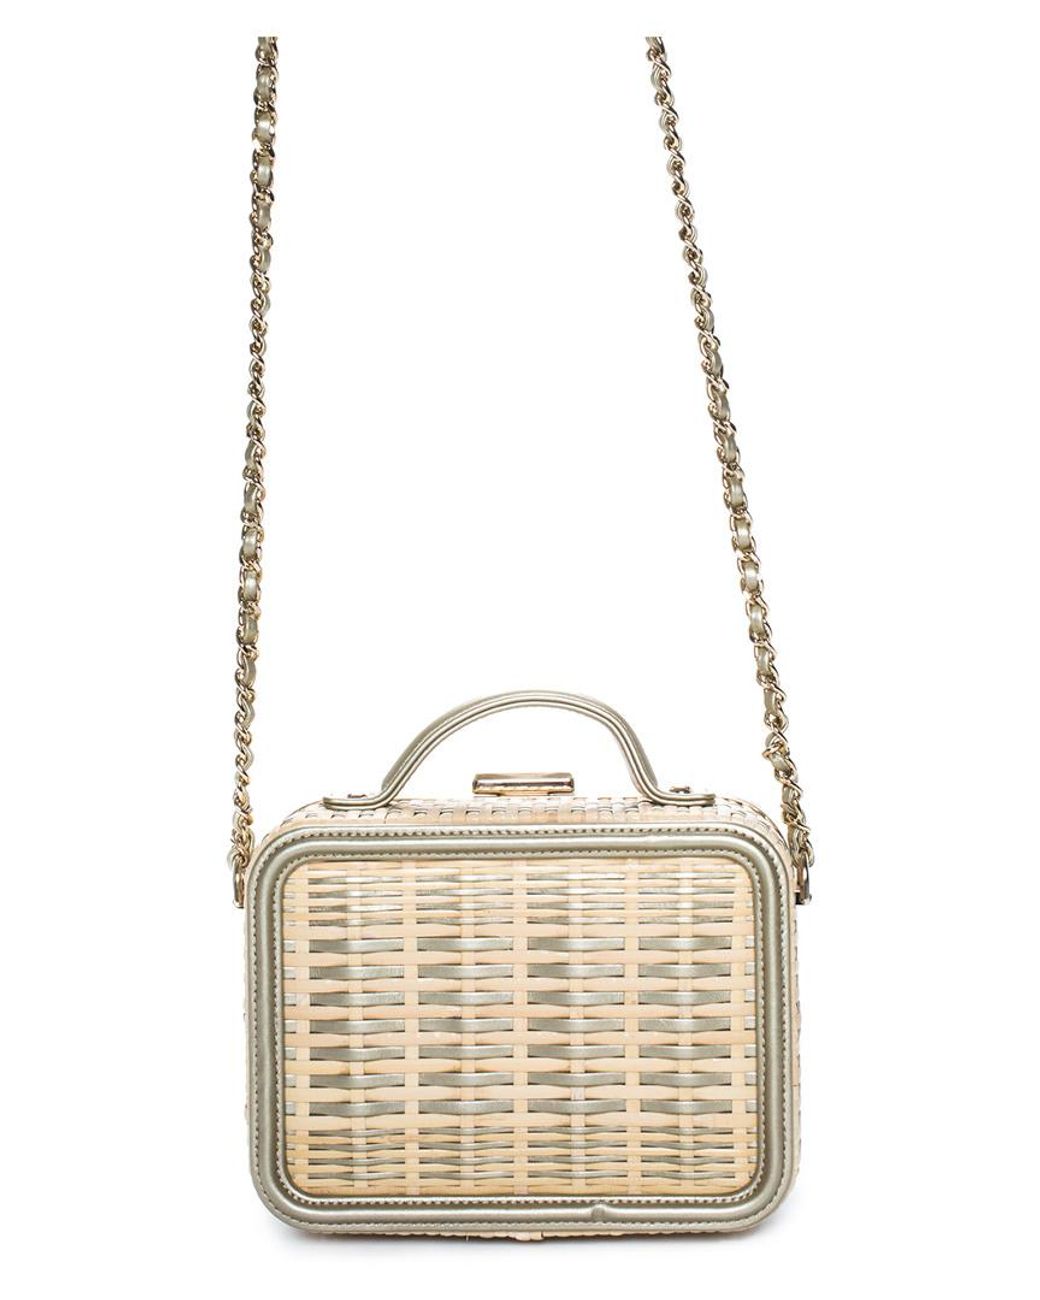 Jil Sander Small Woven Leather Tote Bag-Beige (Totes)